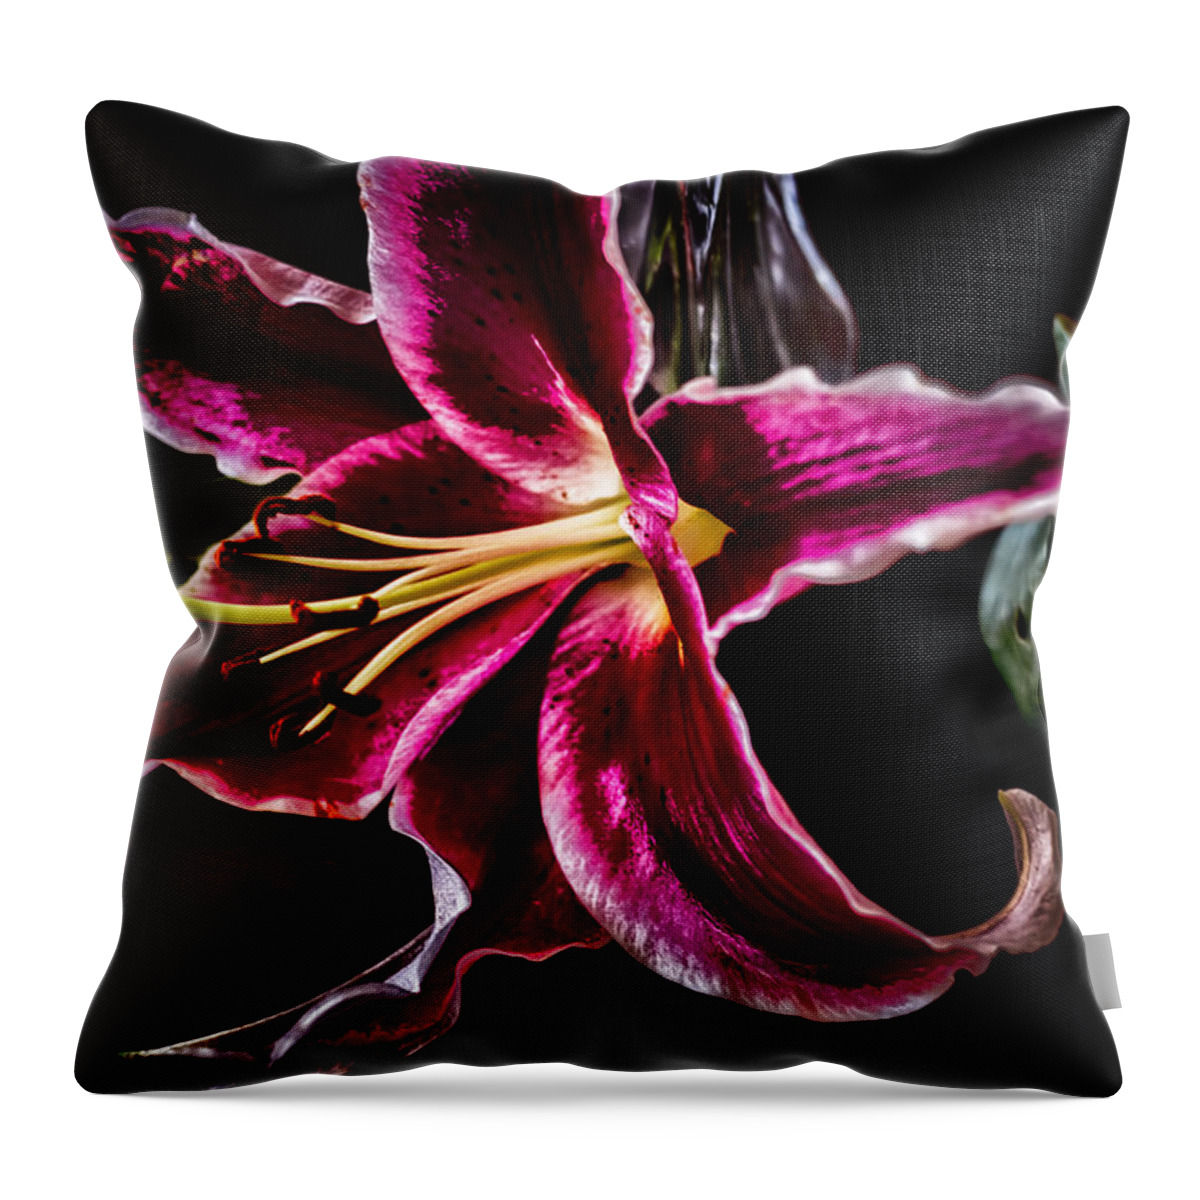 Lily Throw Pillow featuring the photograph Radiating Romance by Linda Tiepelman